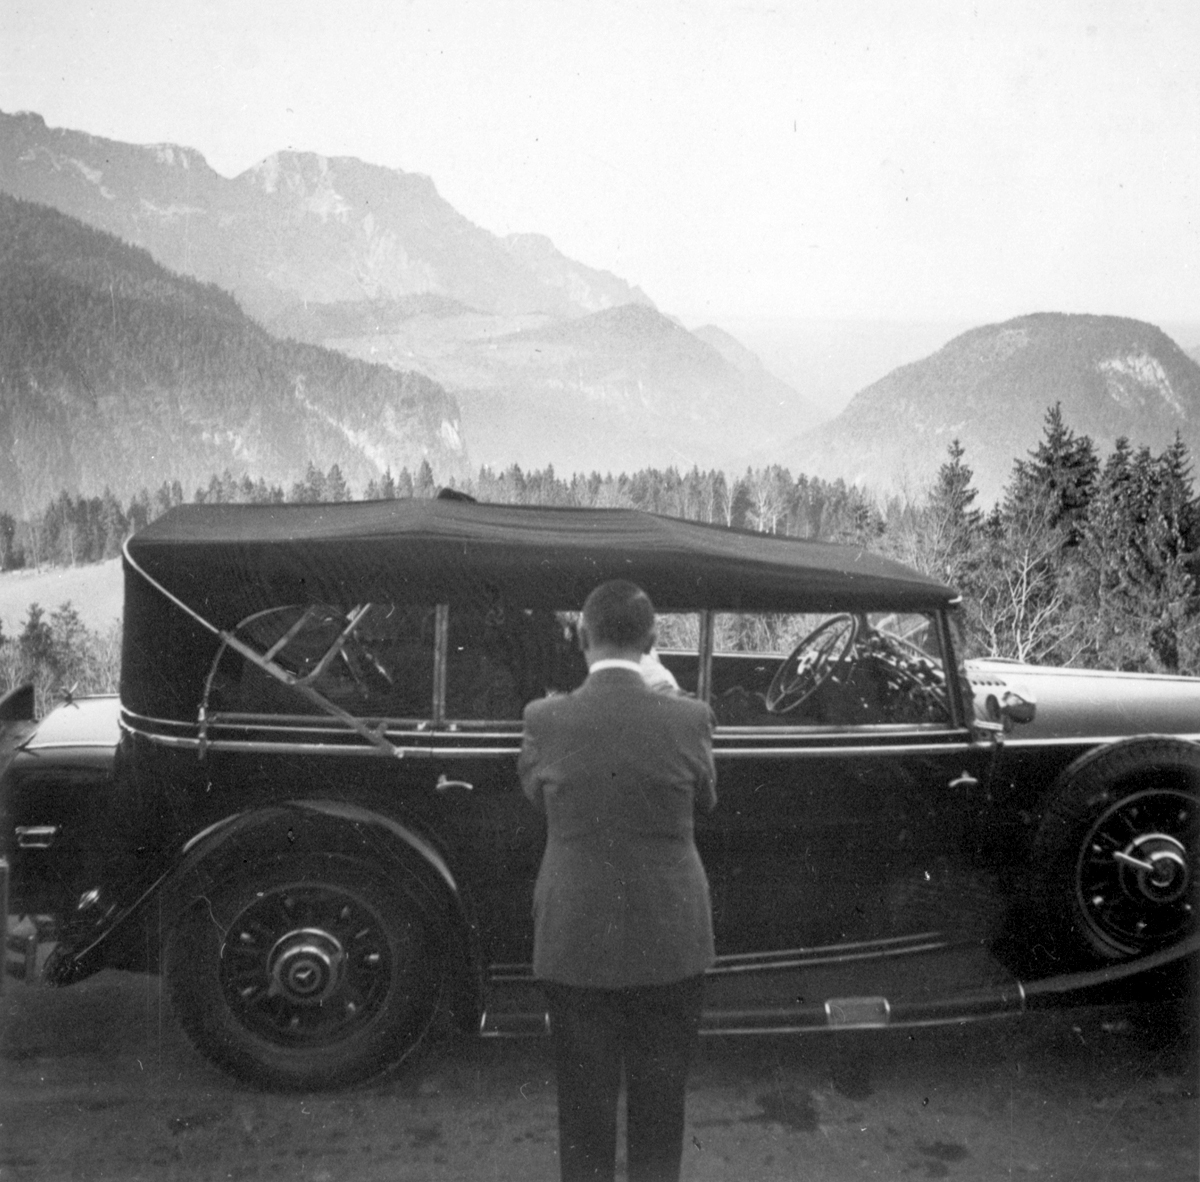 Adolf Hitler bids farewell to Franz Xaver Schwarz and his wife after their visit to the Berghof for Scharz's birthday, from Eva Braun's albums